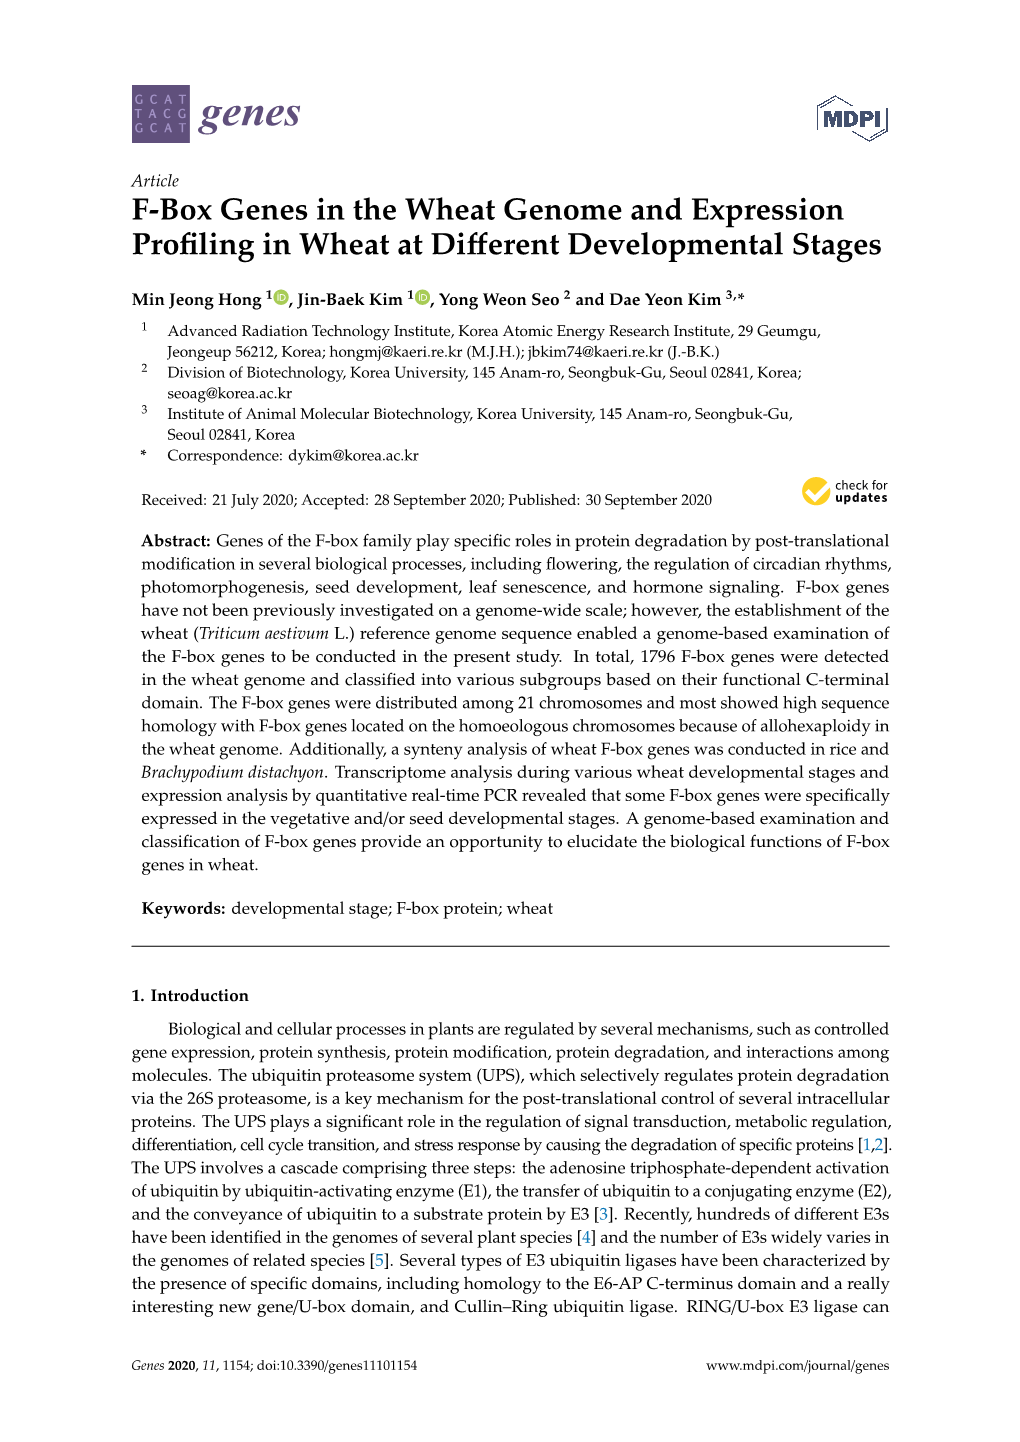 F-Box Genes in the Wheat Genome and Expression Profiling in Wheat at Different Developmental Stages